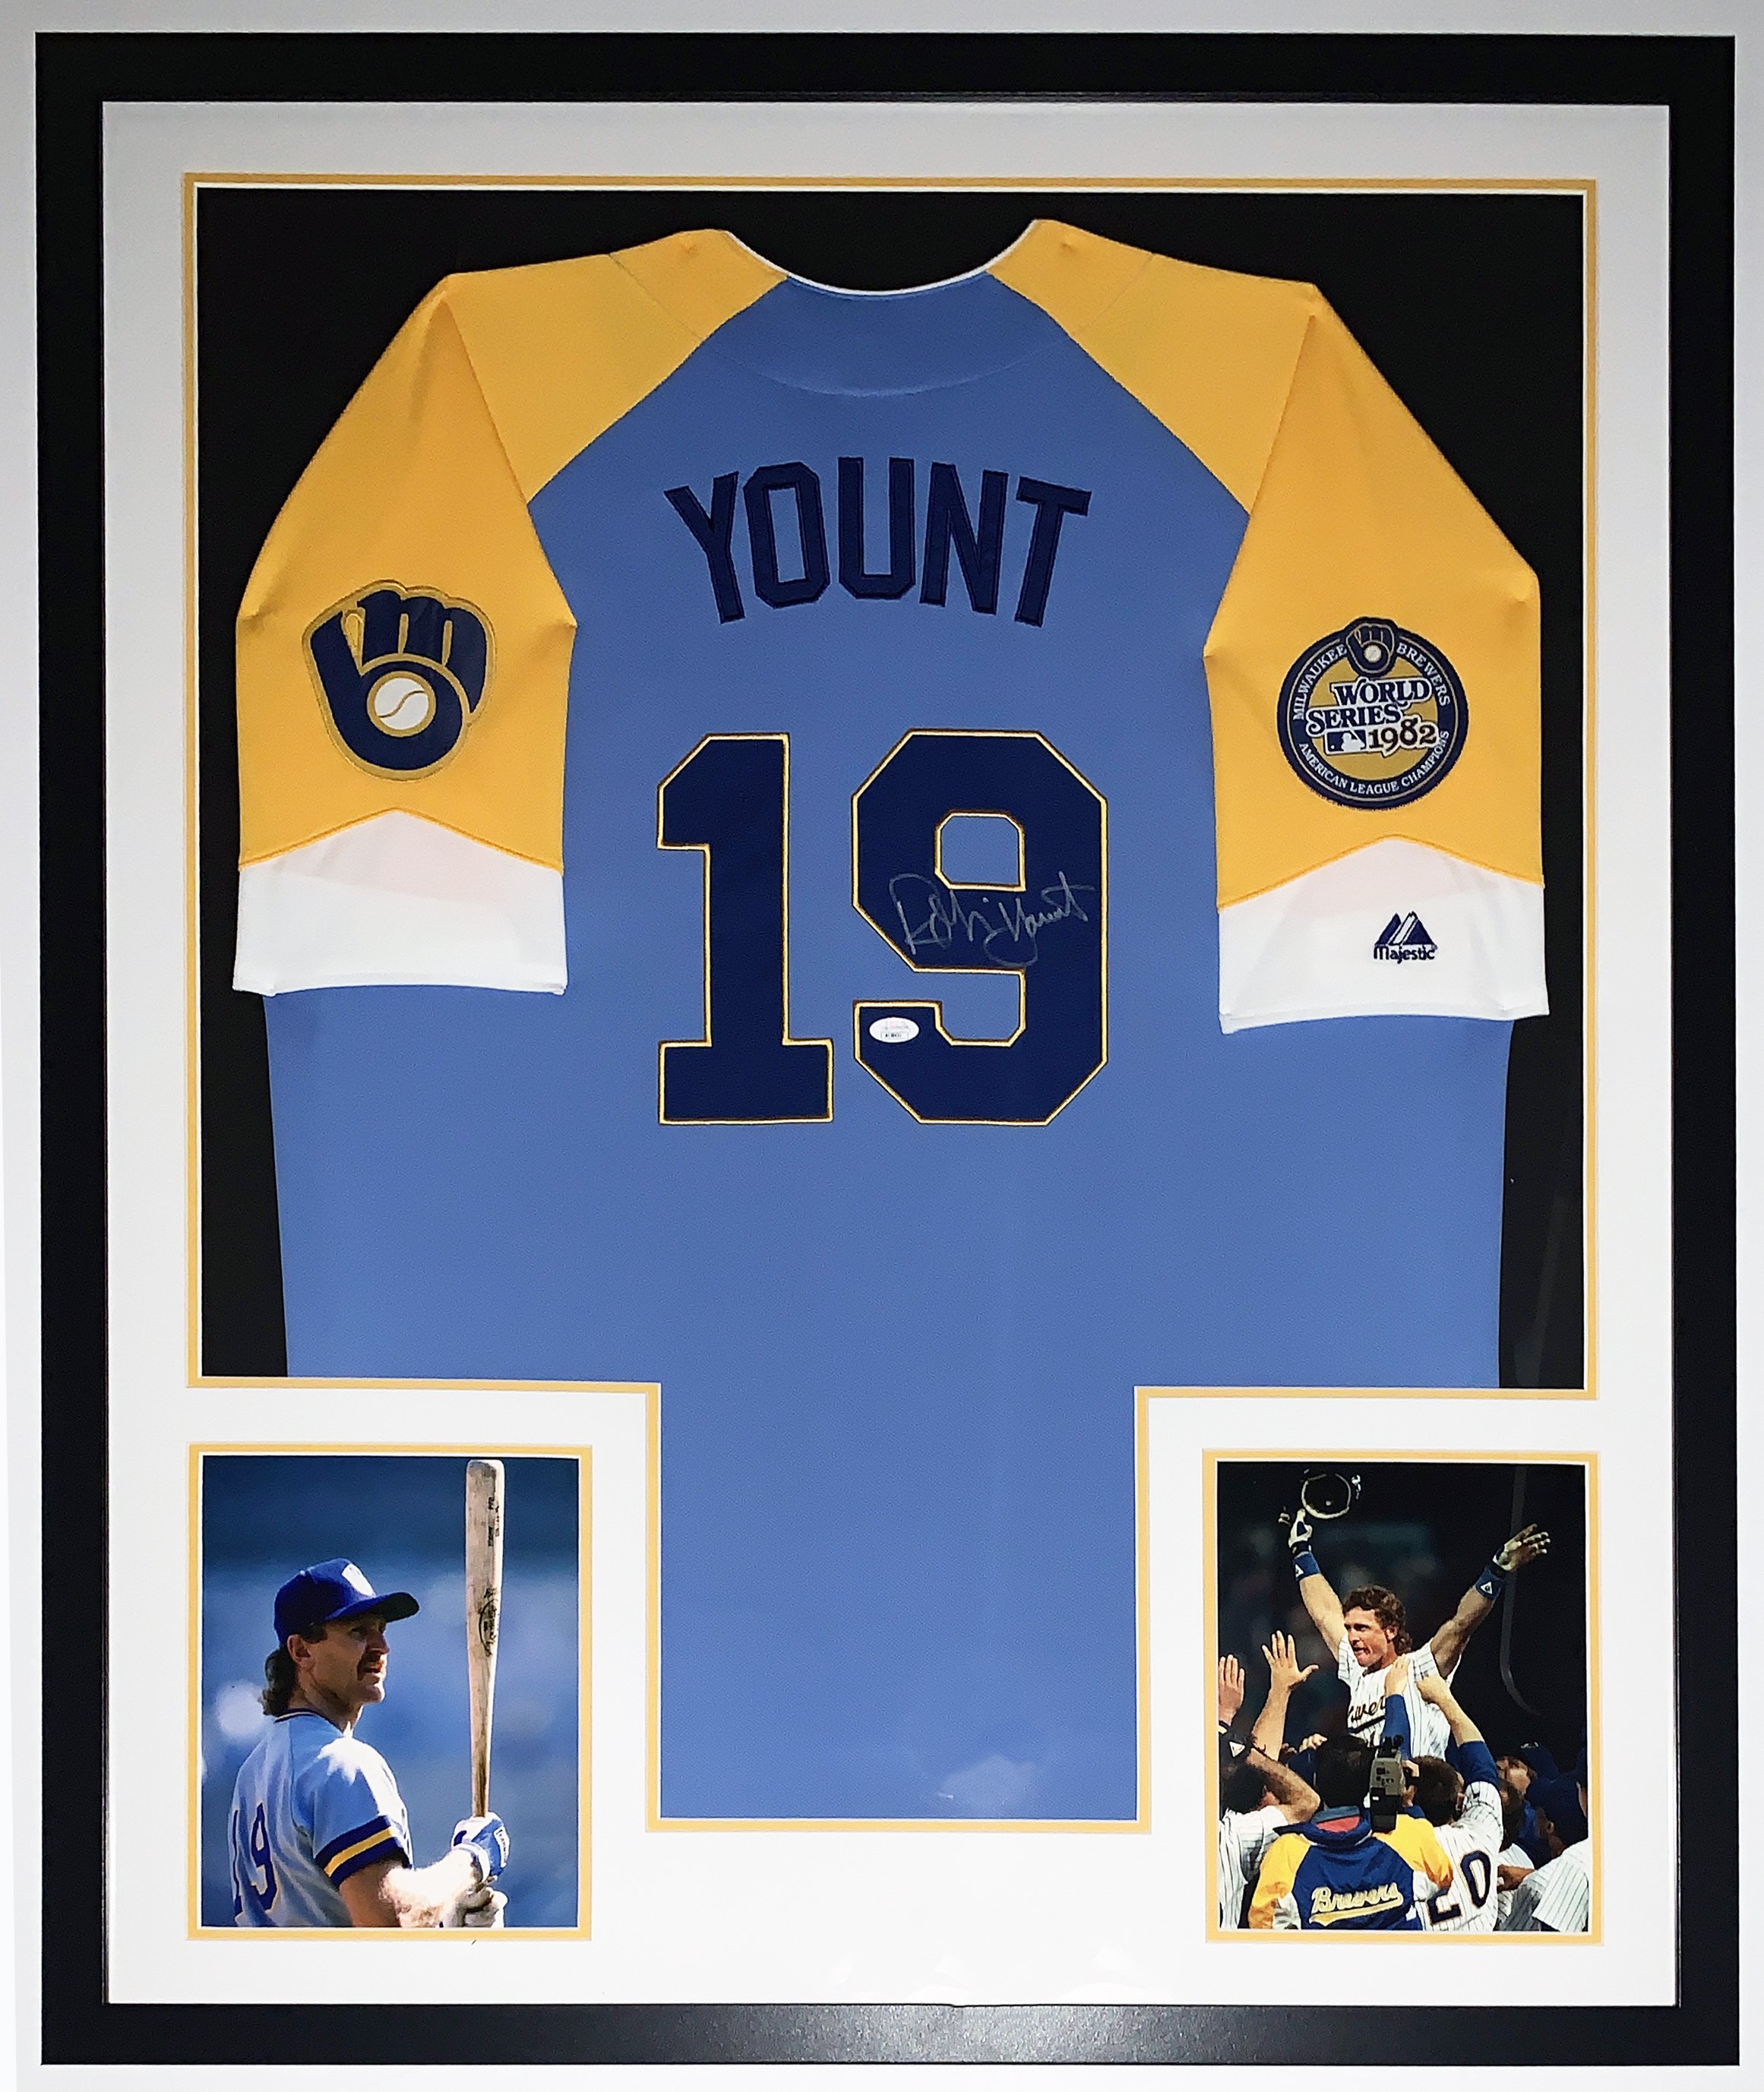 Bleachers Sports Music & Framing — Robin Yount Signed Milwaukee Brewers  1982 World Series Jersey - JSA COA Authenticated - Framed